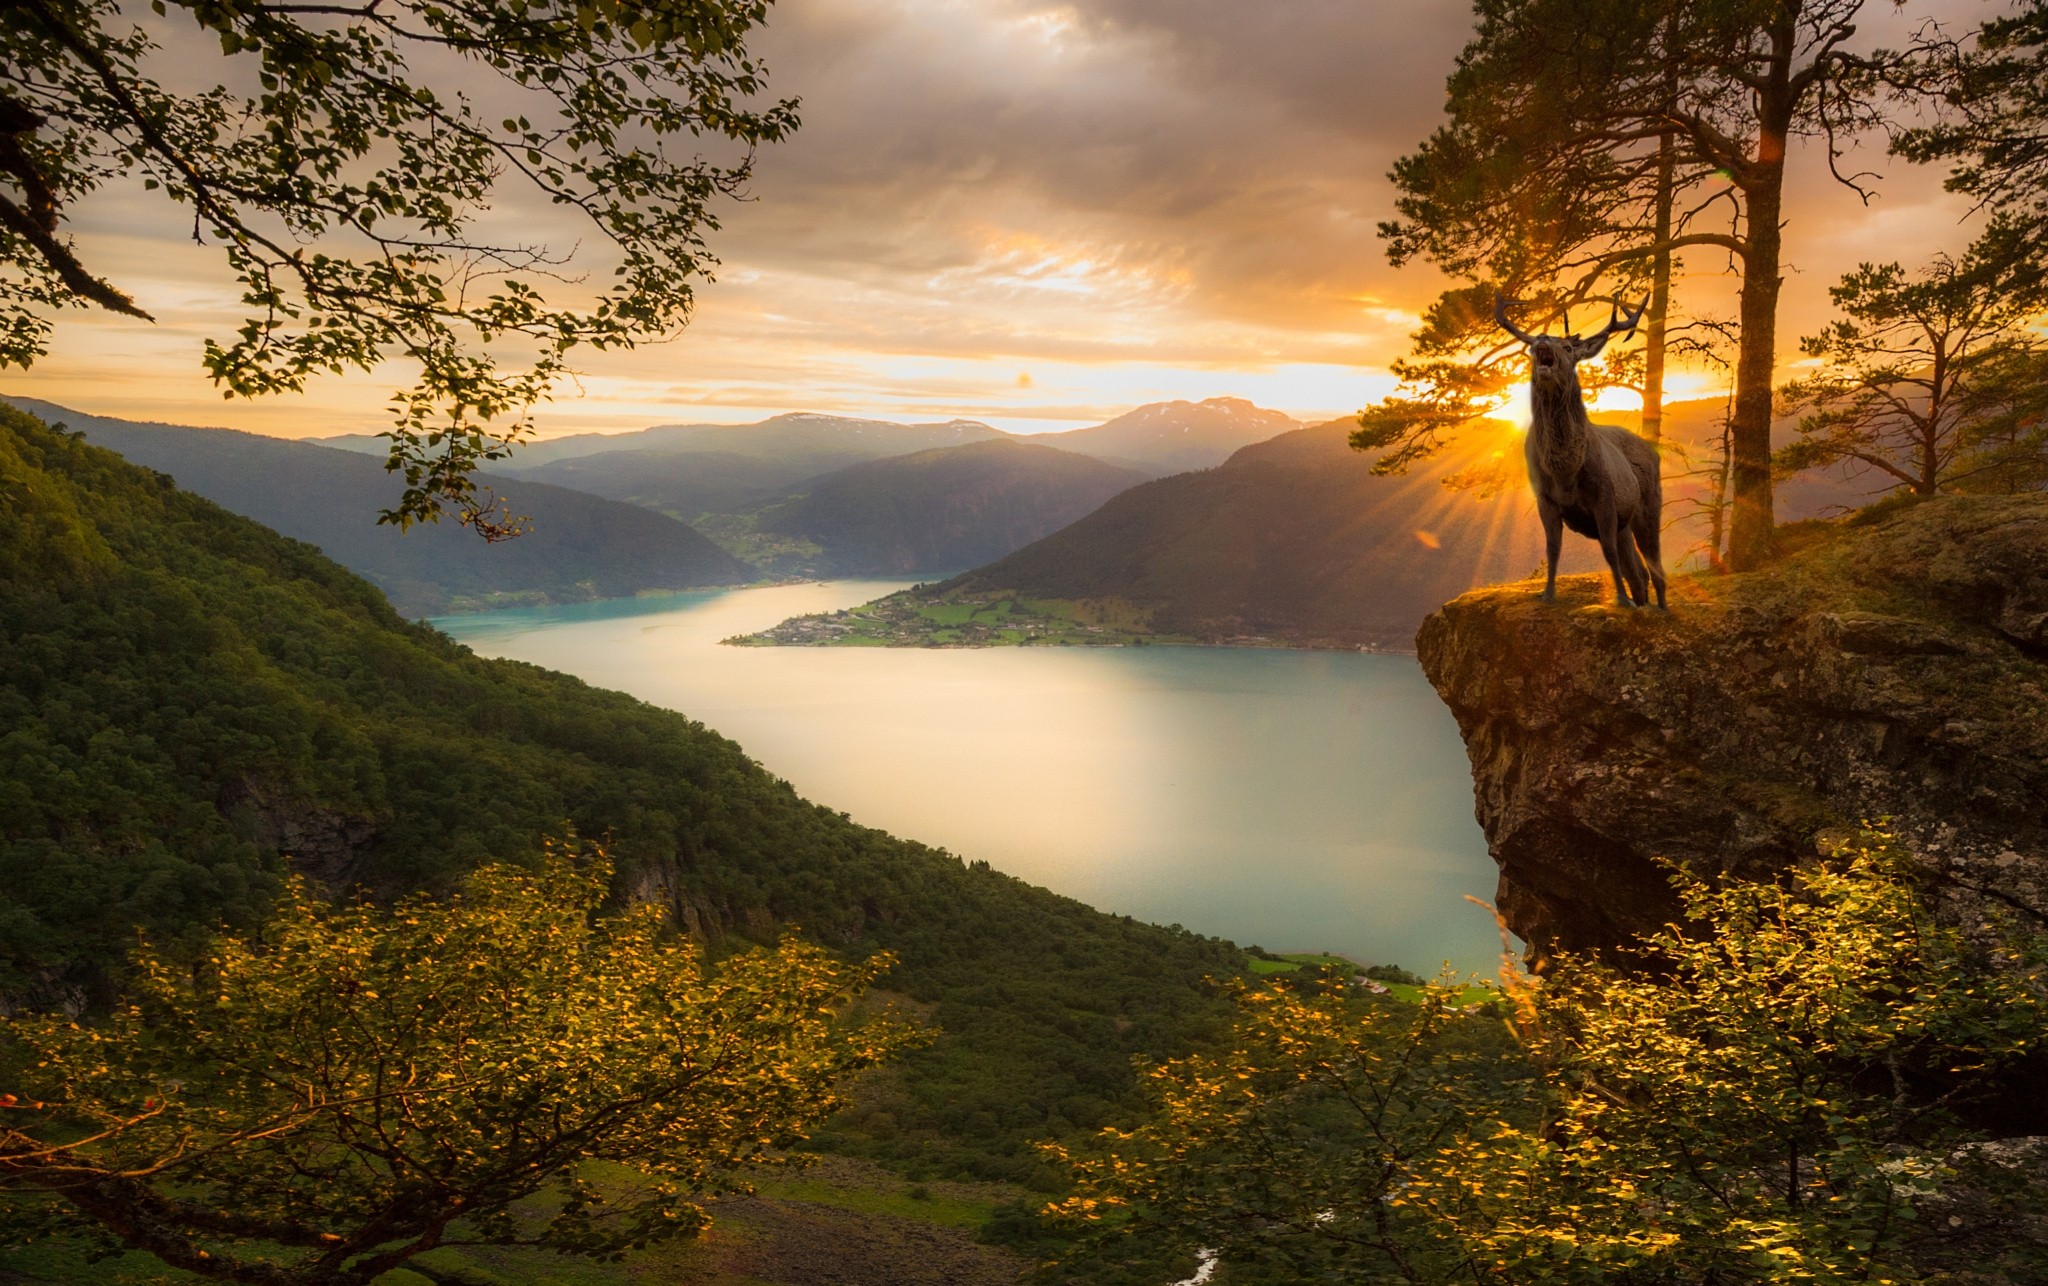 General 2048x1286 deer sunset fjord mountains trees Norway forest nature landscape clouds animals mammals digital art photo manipulation sky sunset glow water